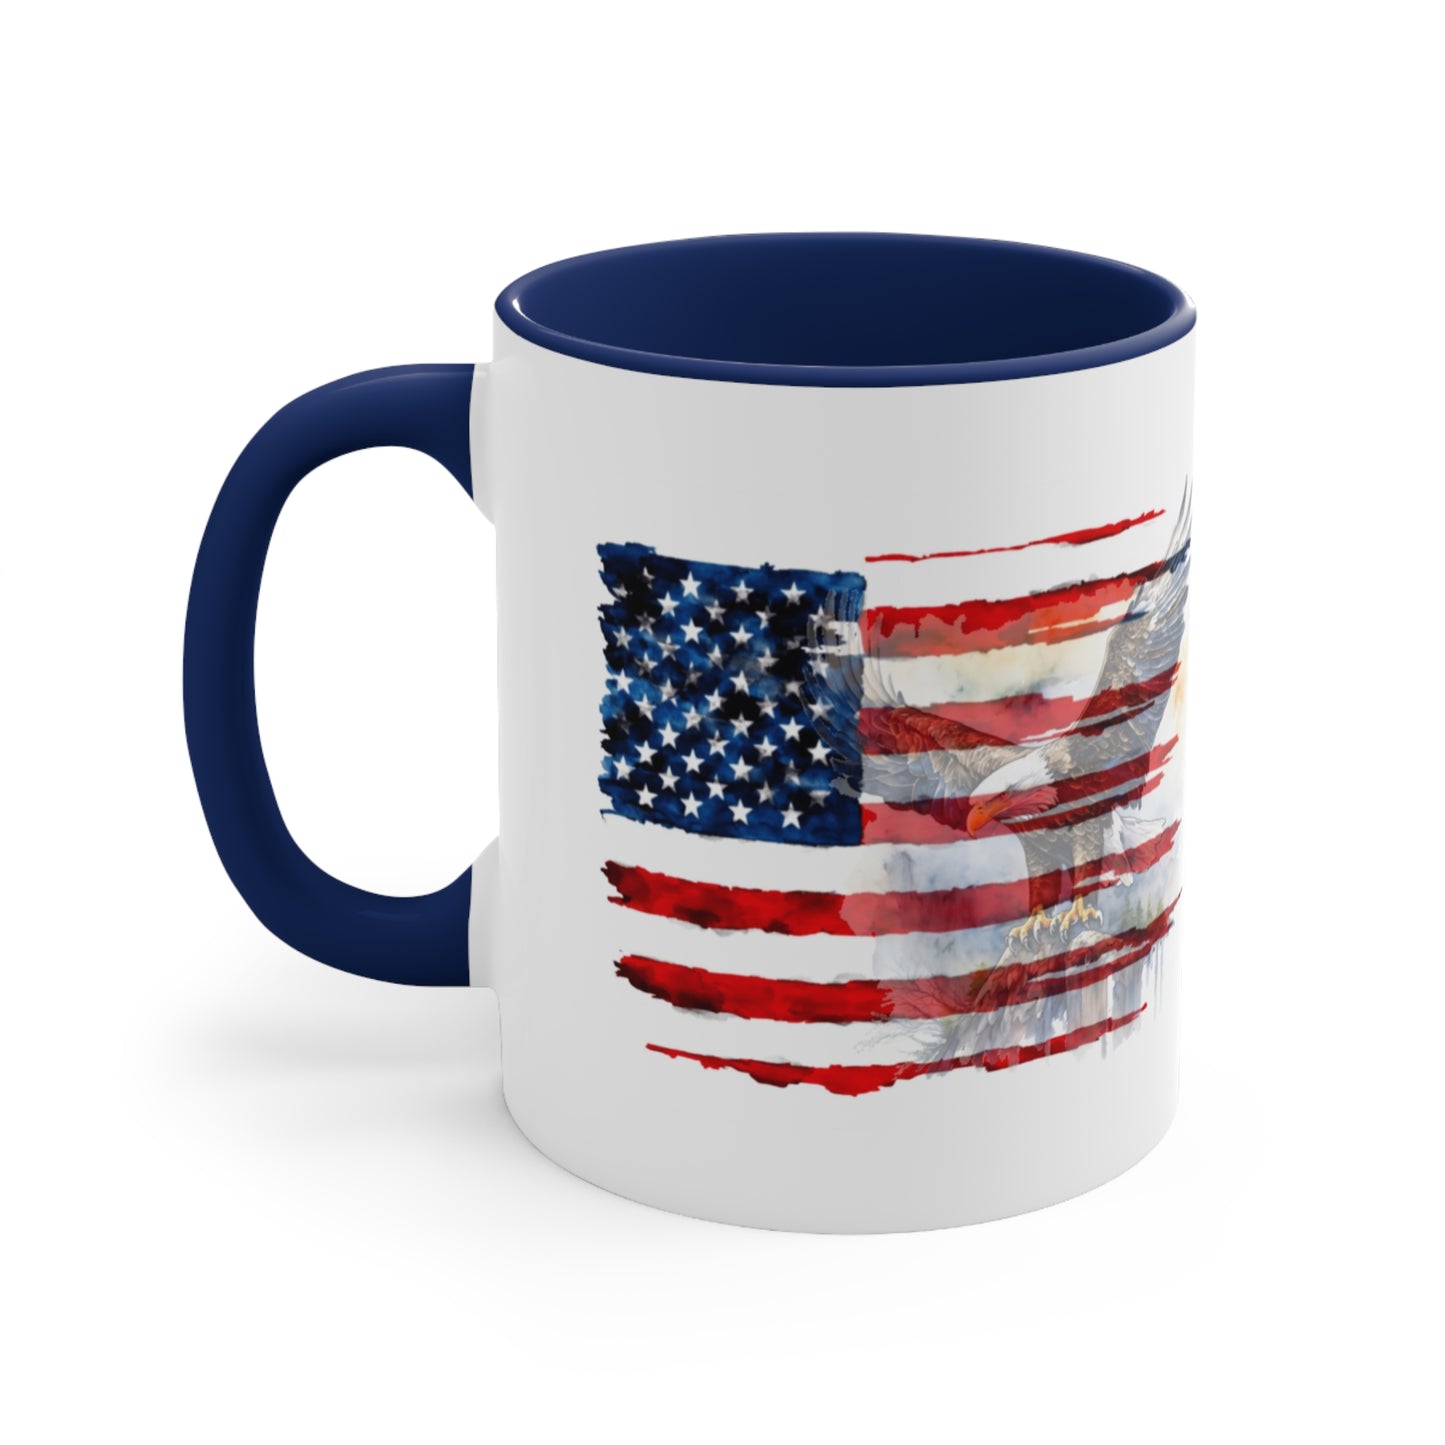 Coffee Mug with US Flag and eagle 11 oz, back view in dark blue.